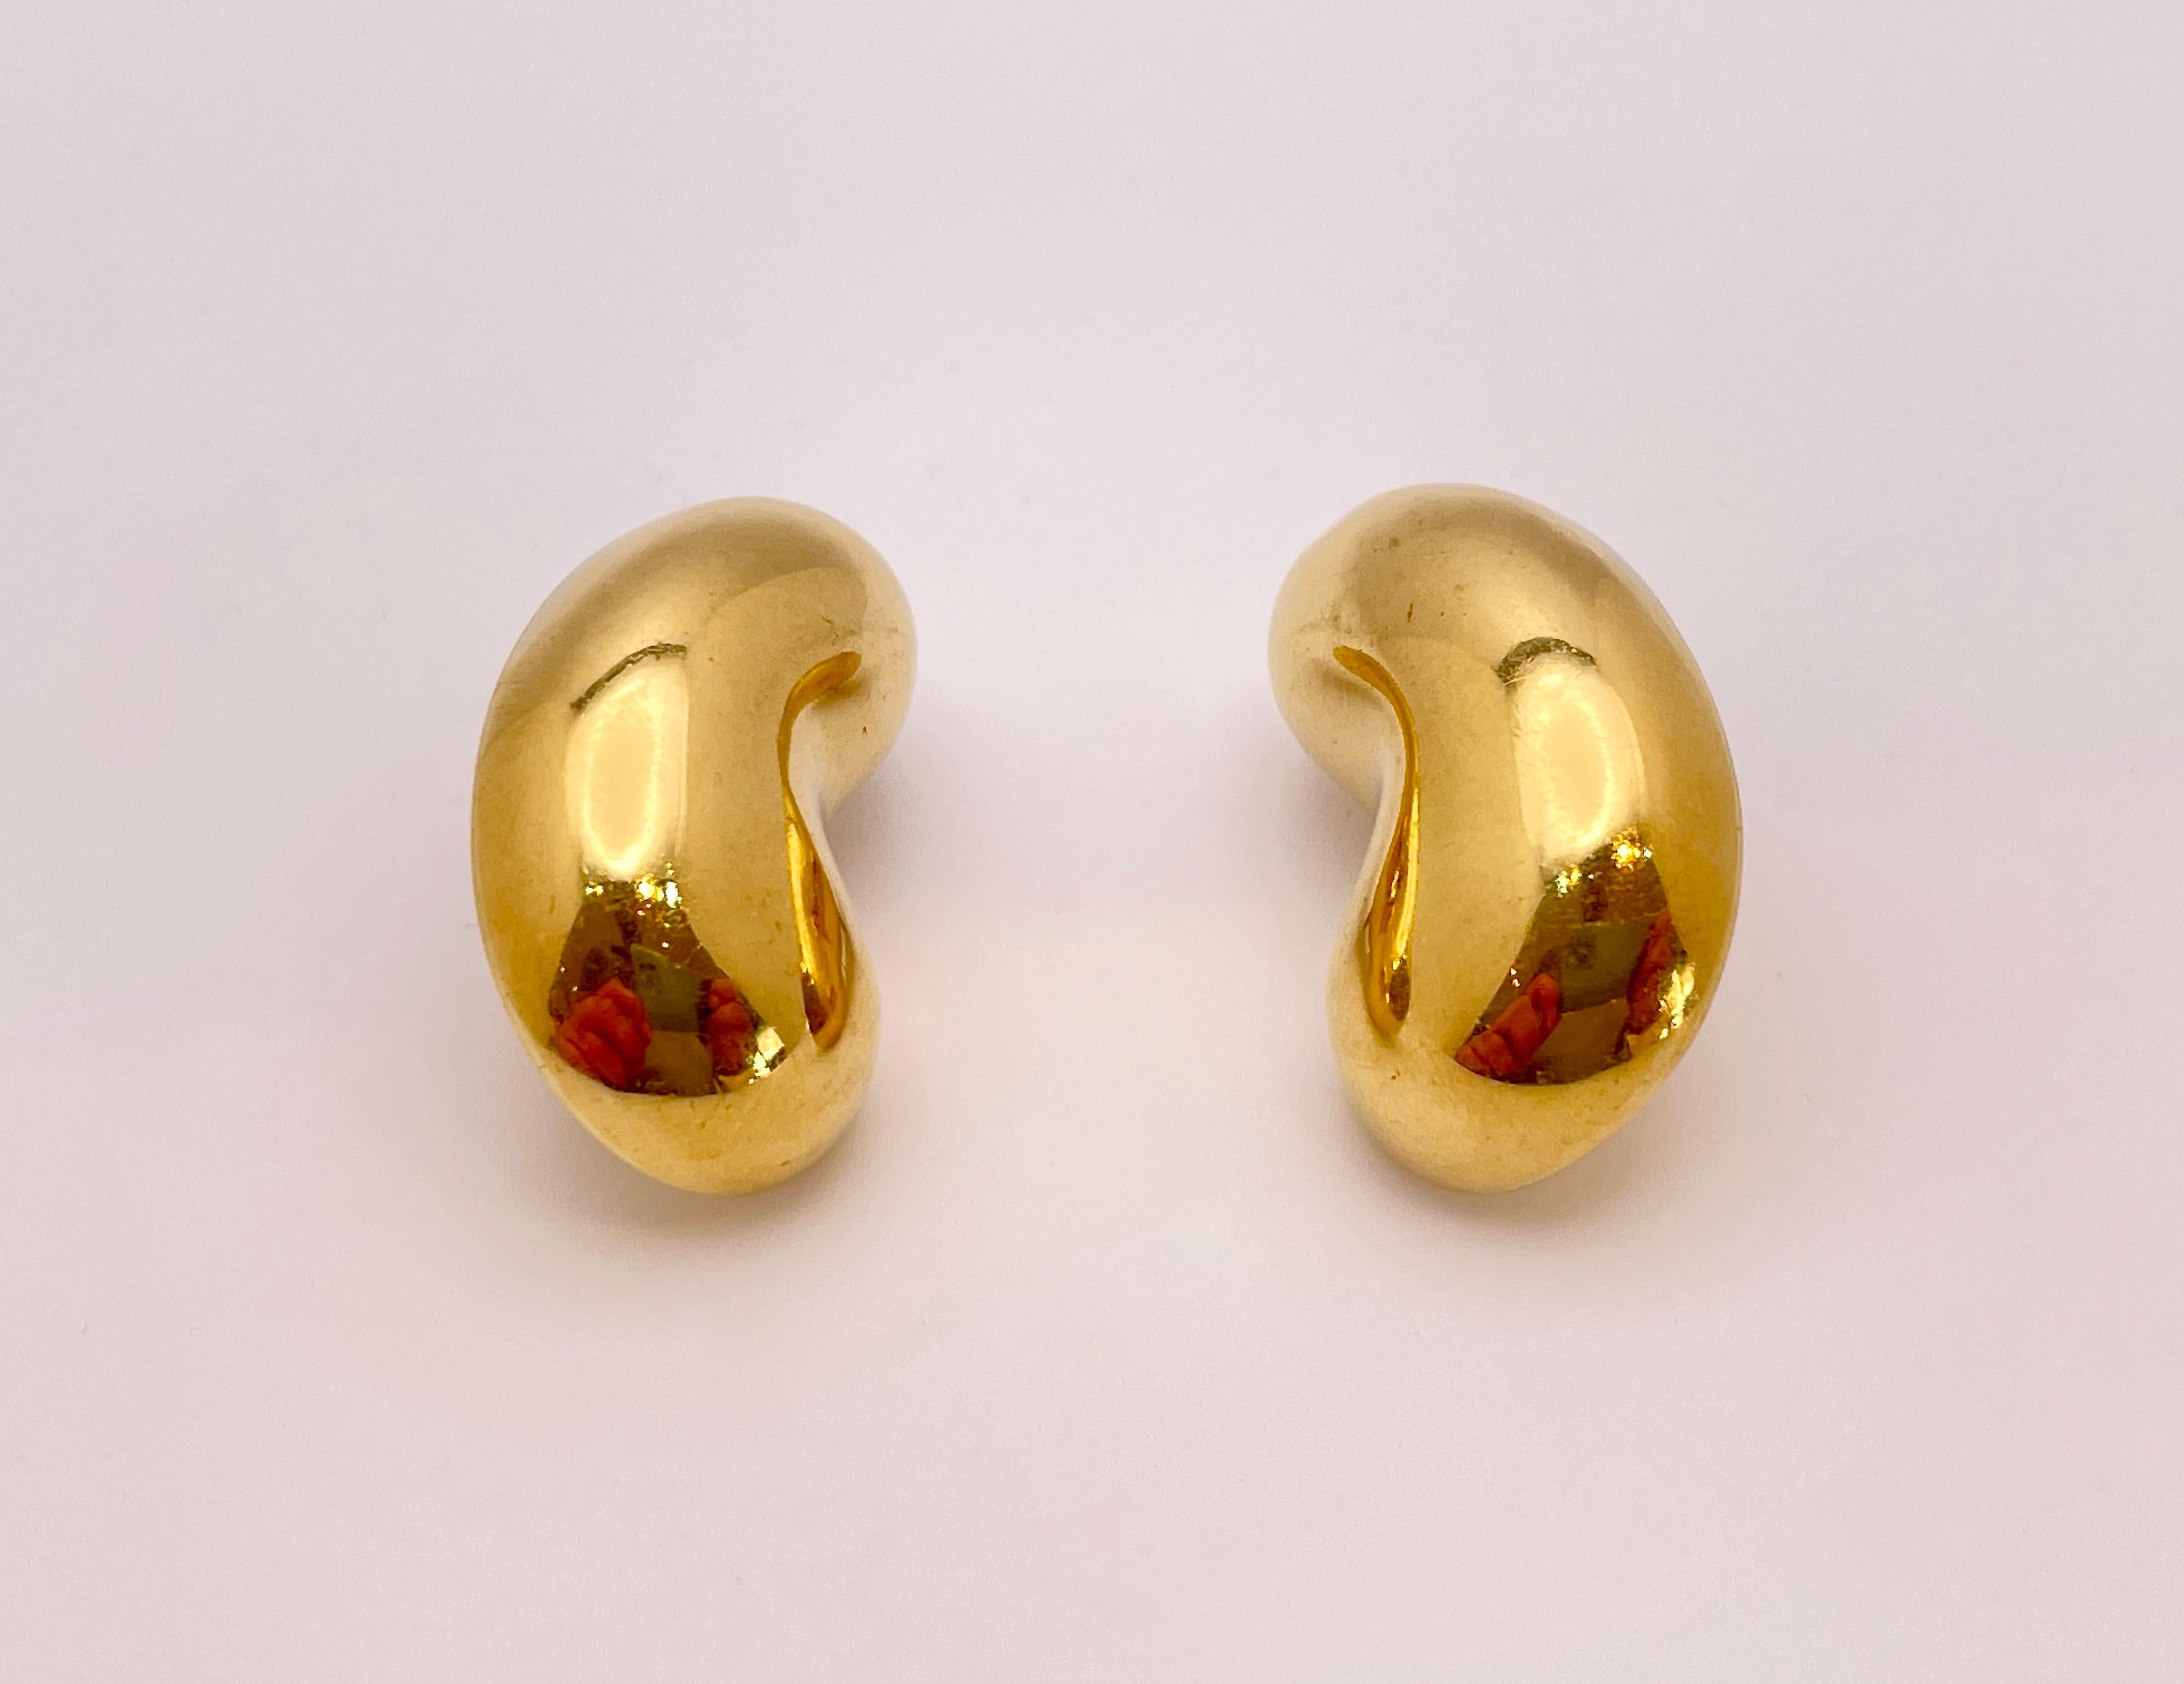 A magnificent pair of 18K yellow gold bean design earrings. These unique earrings feature a lever back post backing. Their gross weight is 14.90 grams and they both measure approximately 1.20 x 0.50 x 0.25 inches. Embrace effortless elegance with